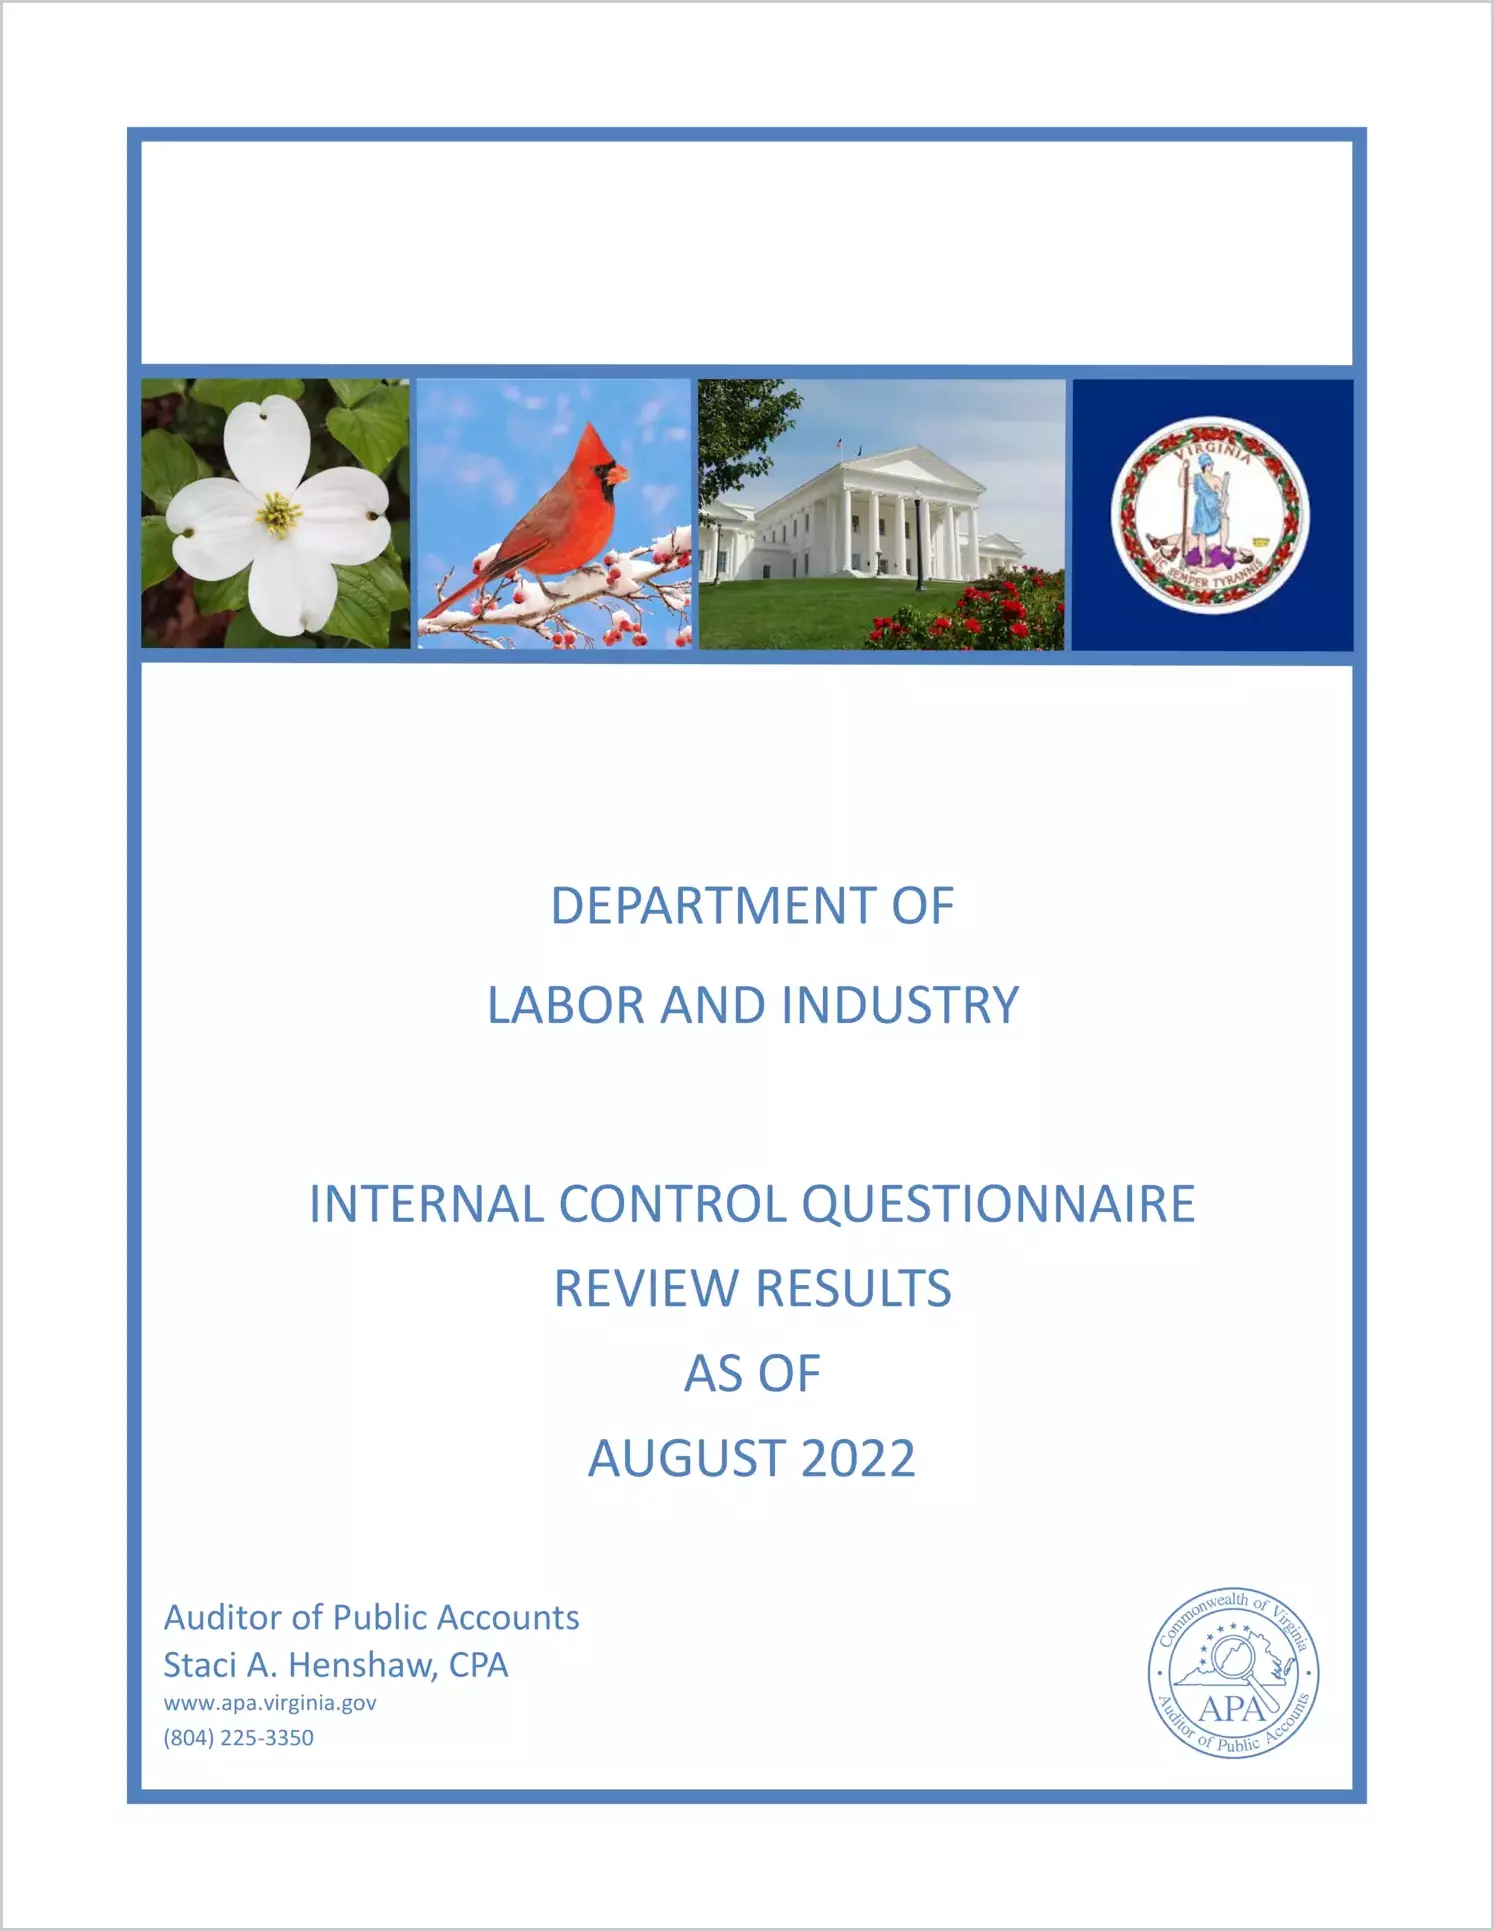 Department of Labor and Industry Internal Control Questionnaire Review Results as of August 2022